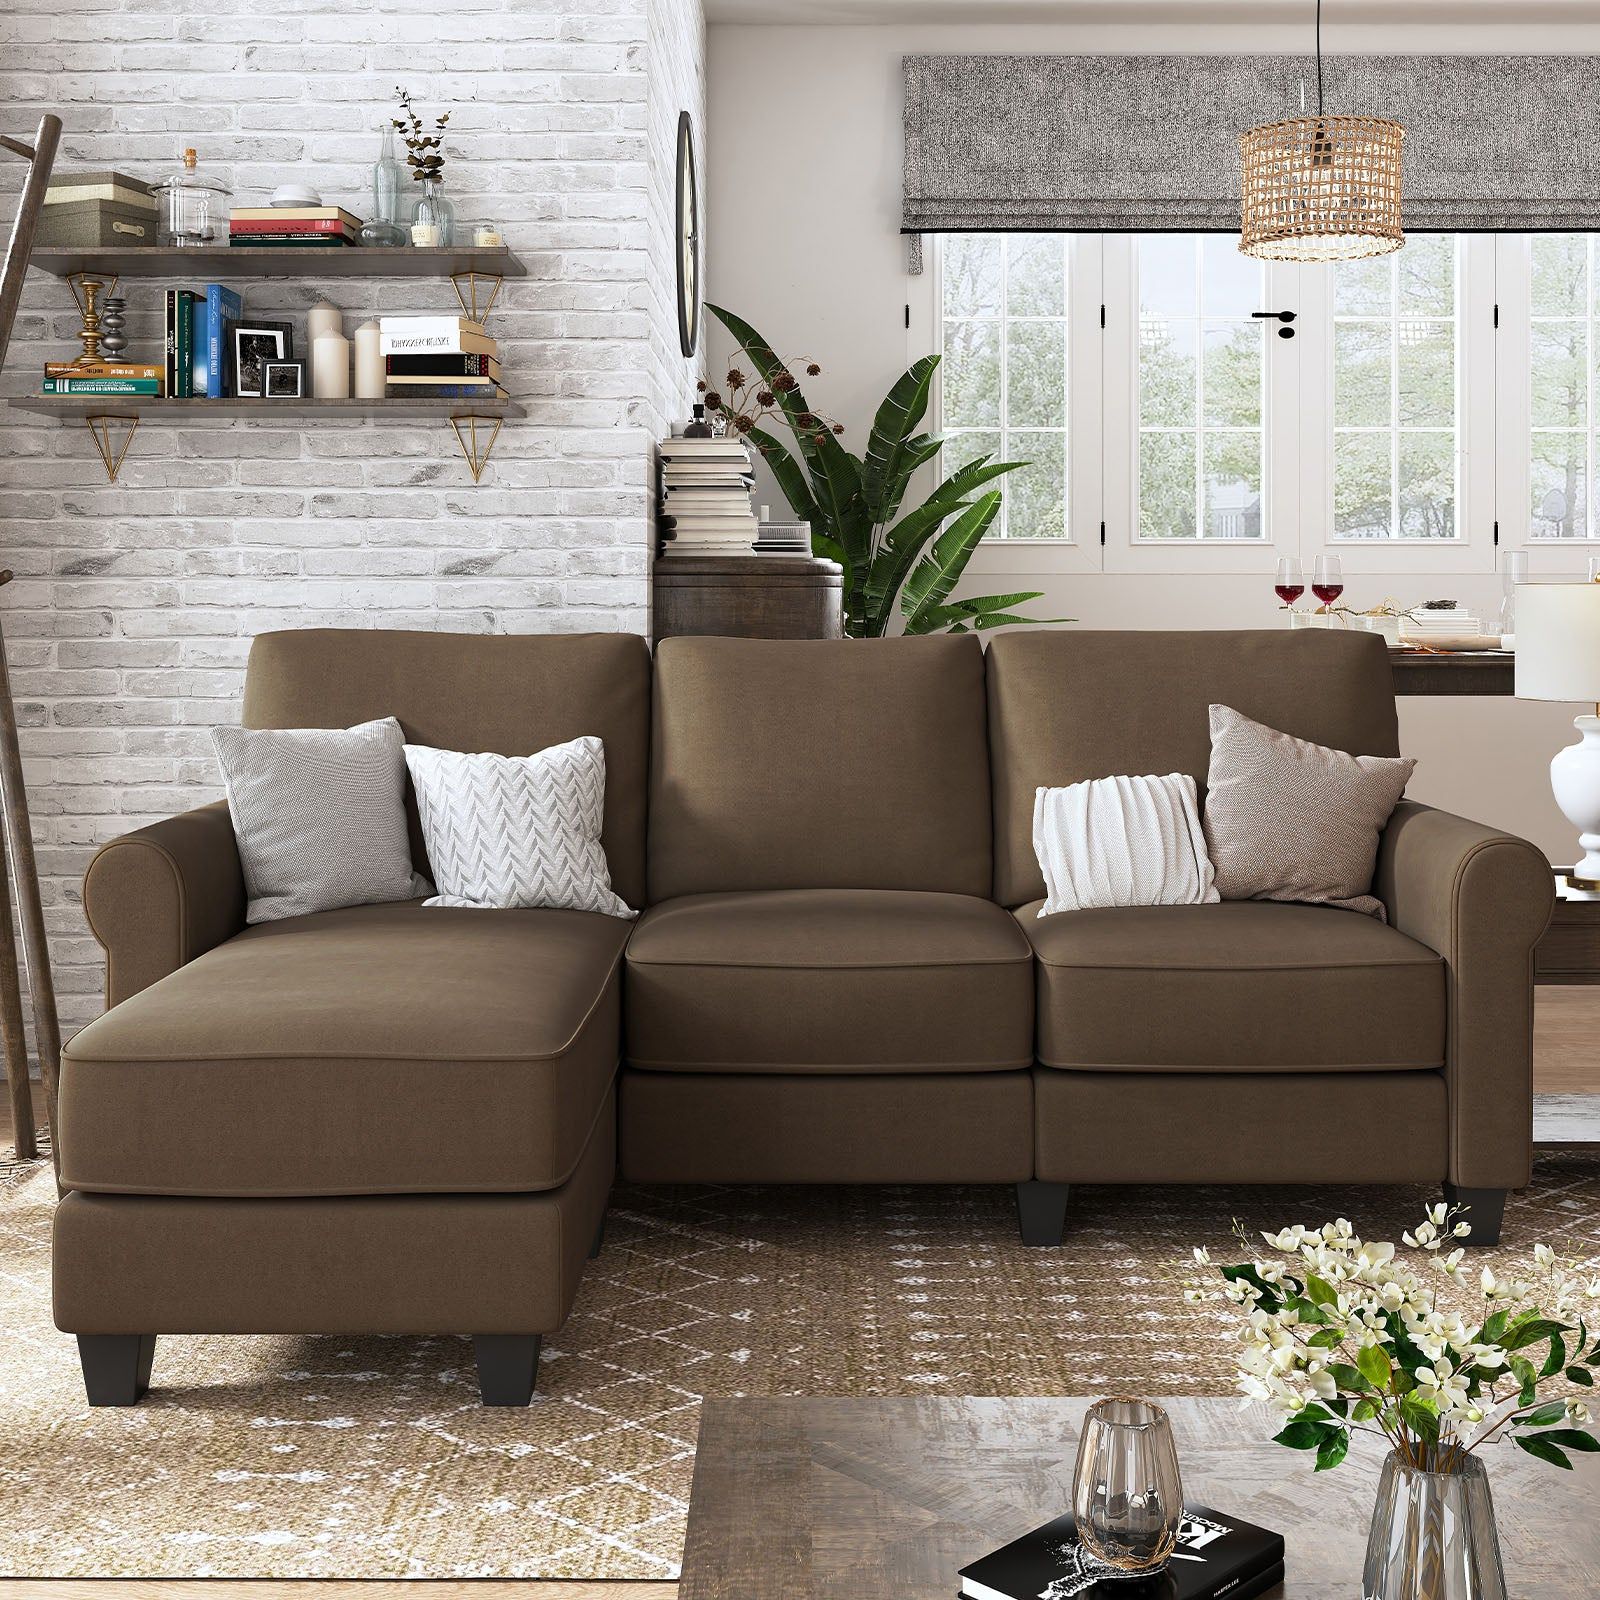 Nolany 3 Seat L Shaped Reversible Sectional Sofa Couch | Nolany Regarding 3 Seat Convertible Sectional Sofas (Gallery 11 of 20)